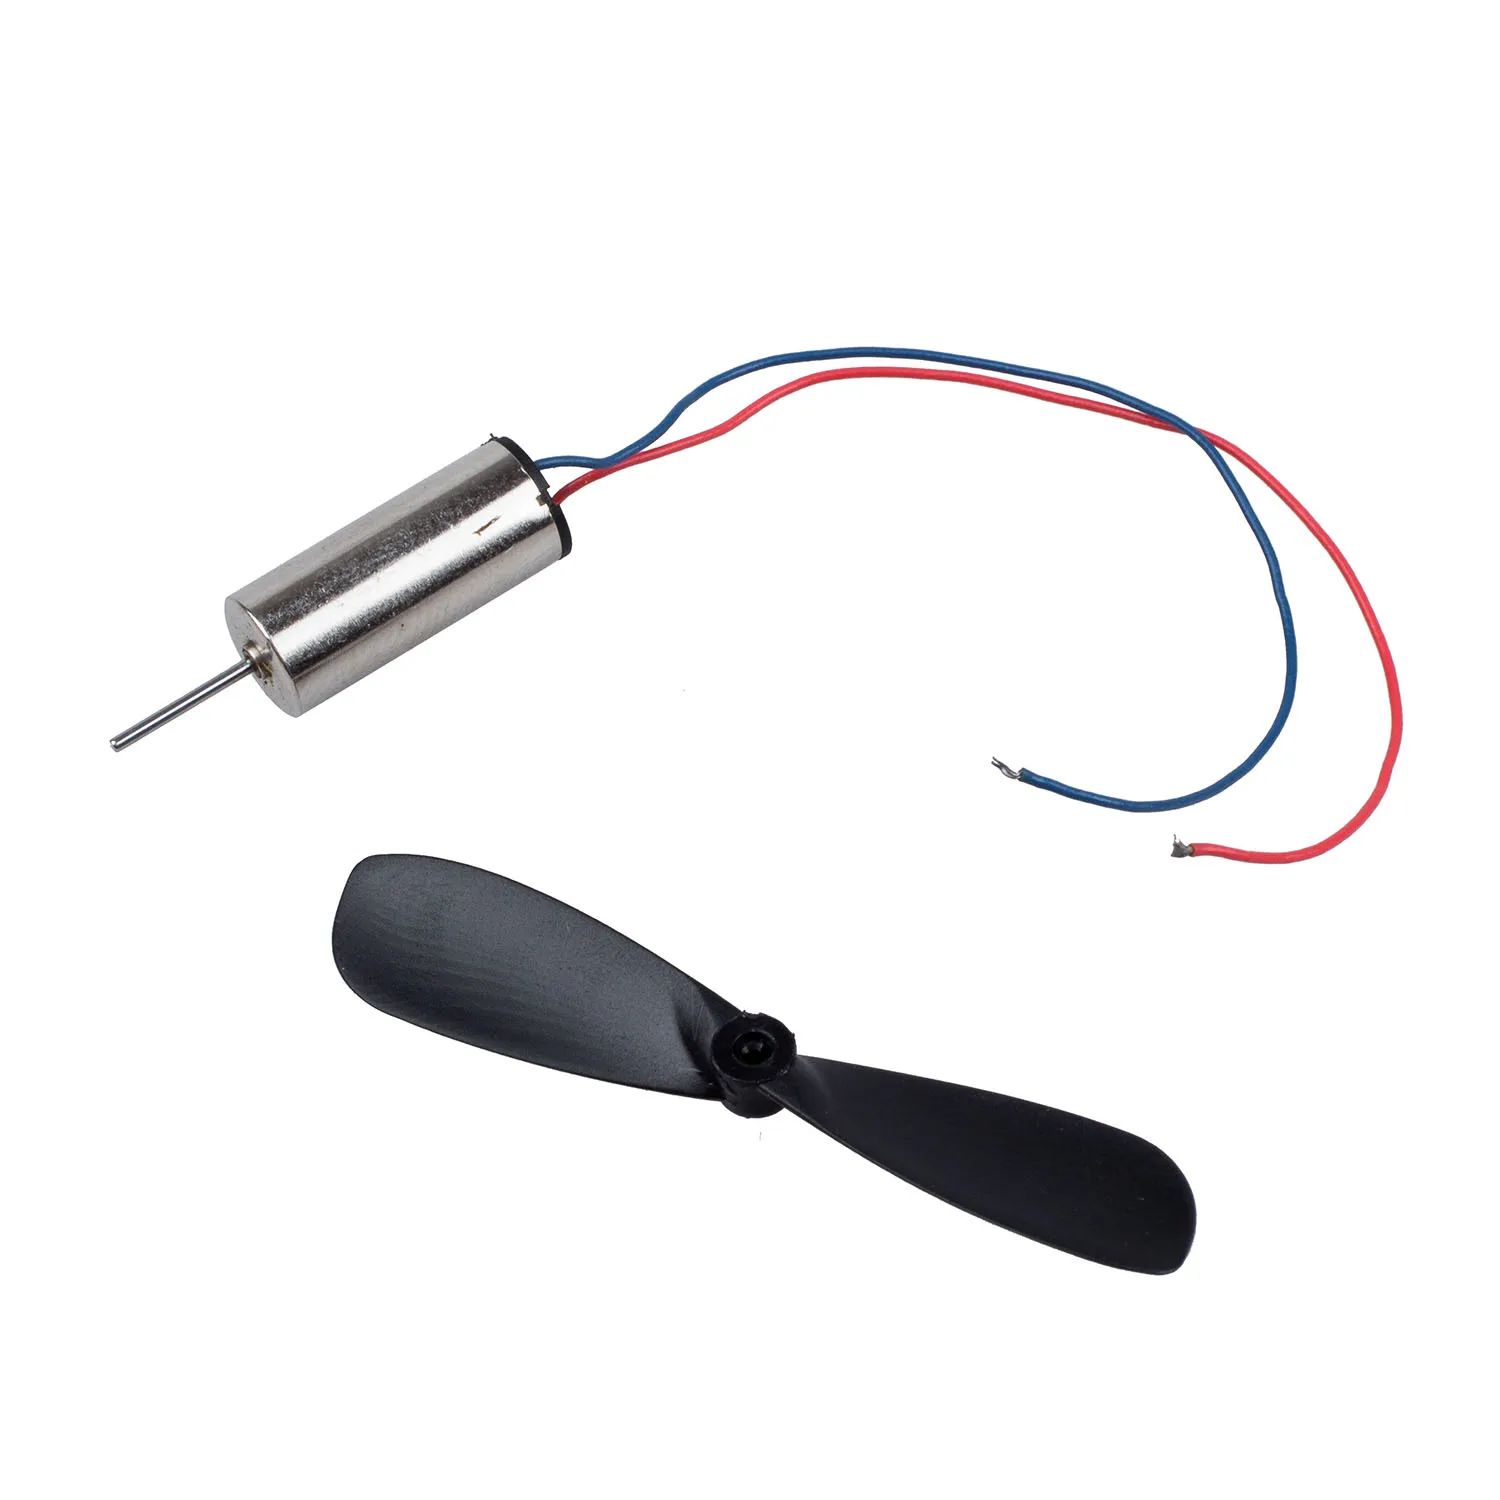 

DC 3.7V 48000RPM Coreless Motor + Propeller for RC Aircraft Helicopter Toy